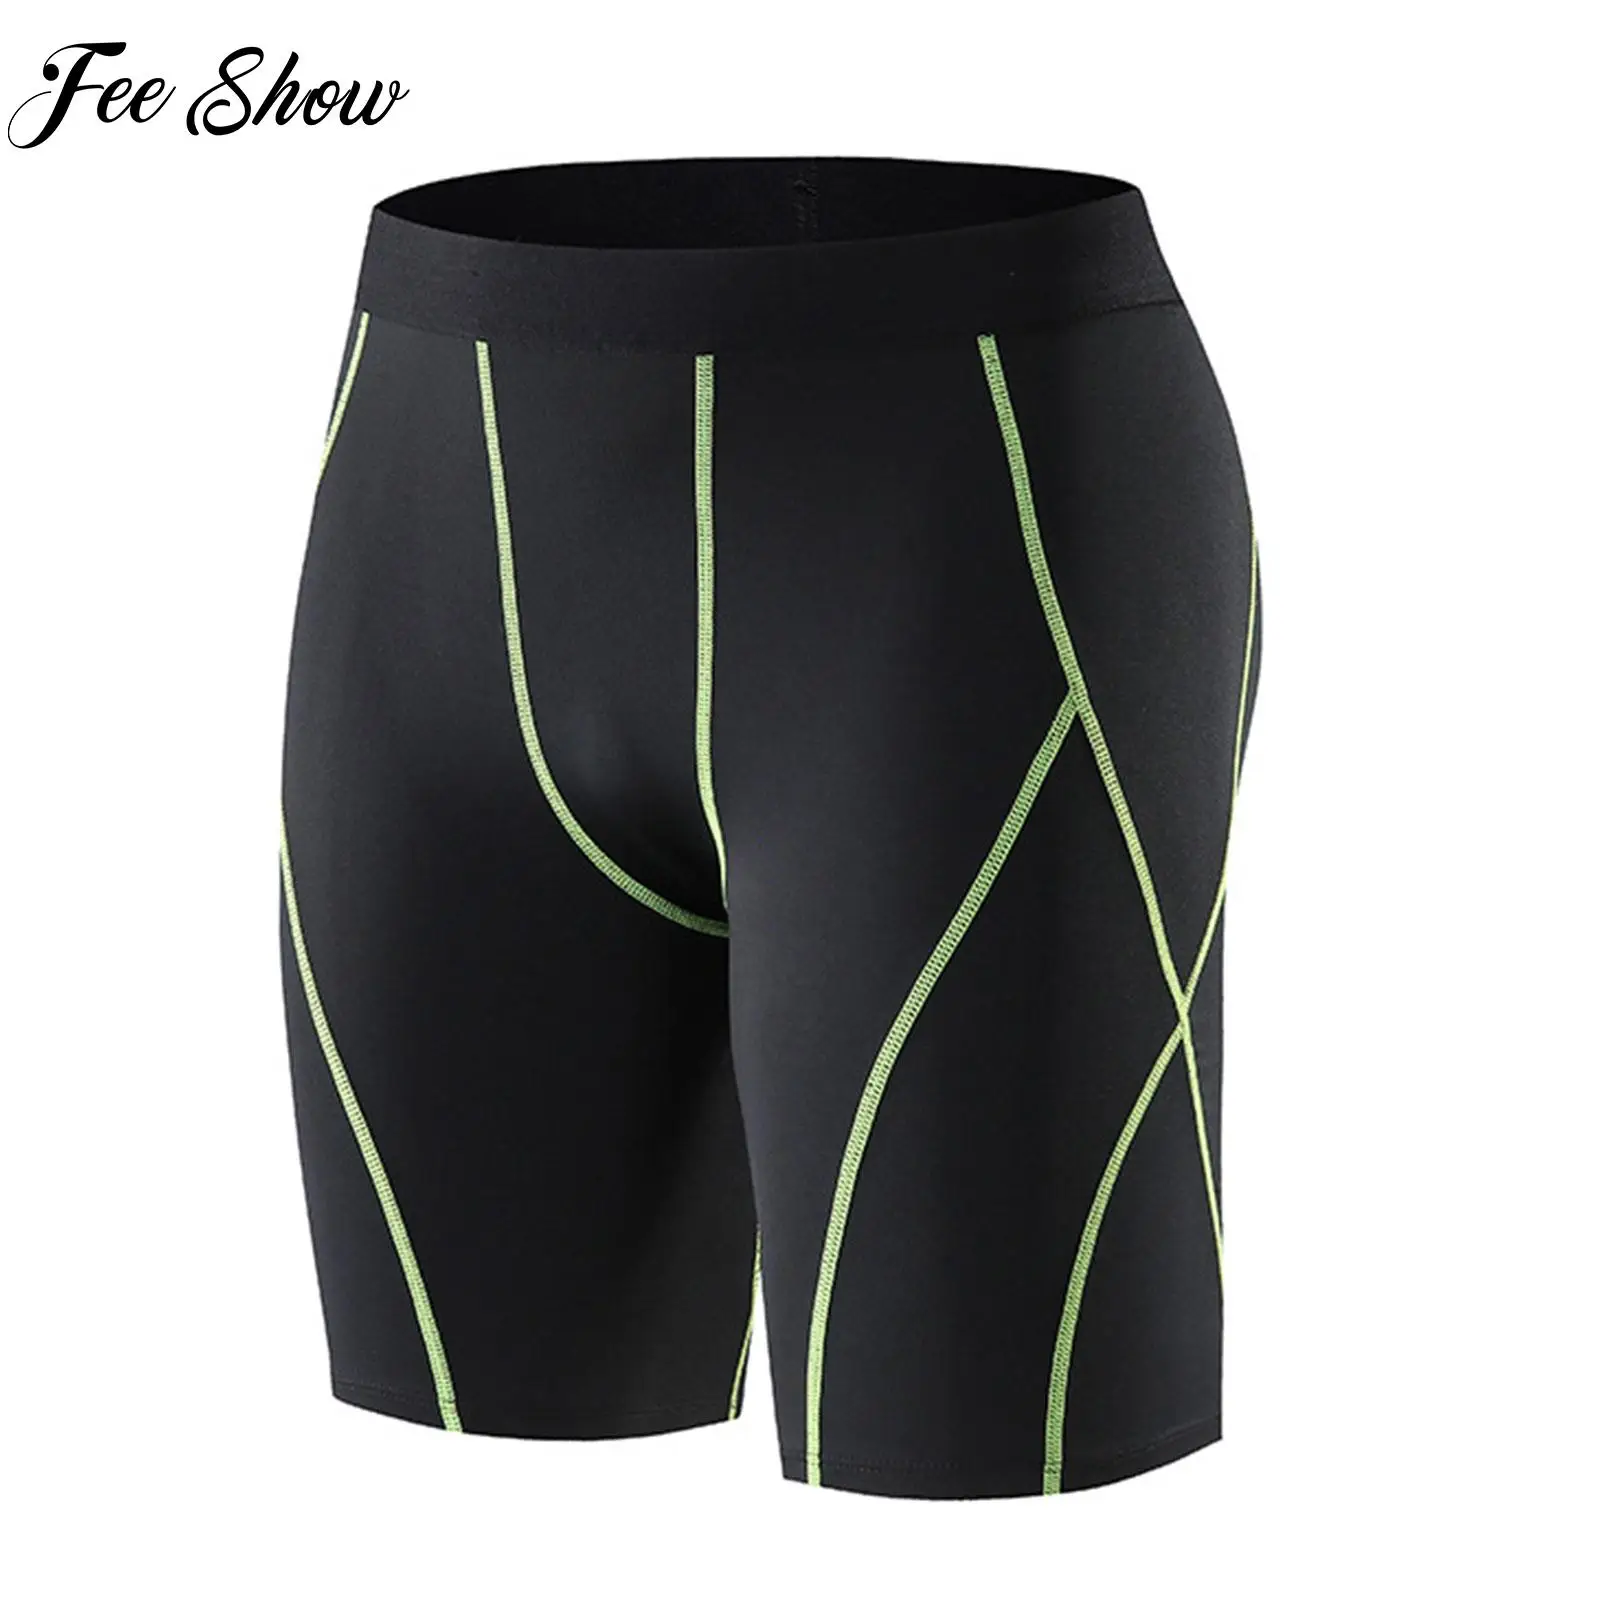 

Men Elastic Snugly Sport Shorts Moisture-wicking Breathable Compression Shorts Running Jogging Gym Workout Training Shorts